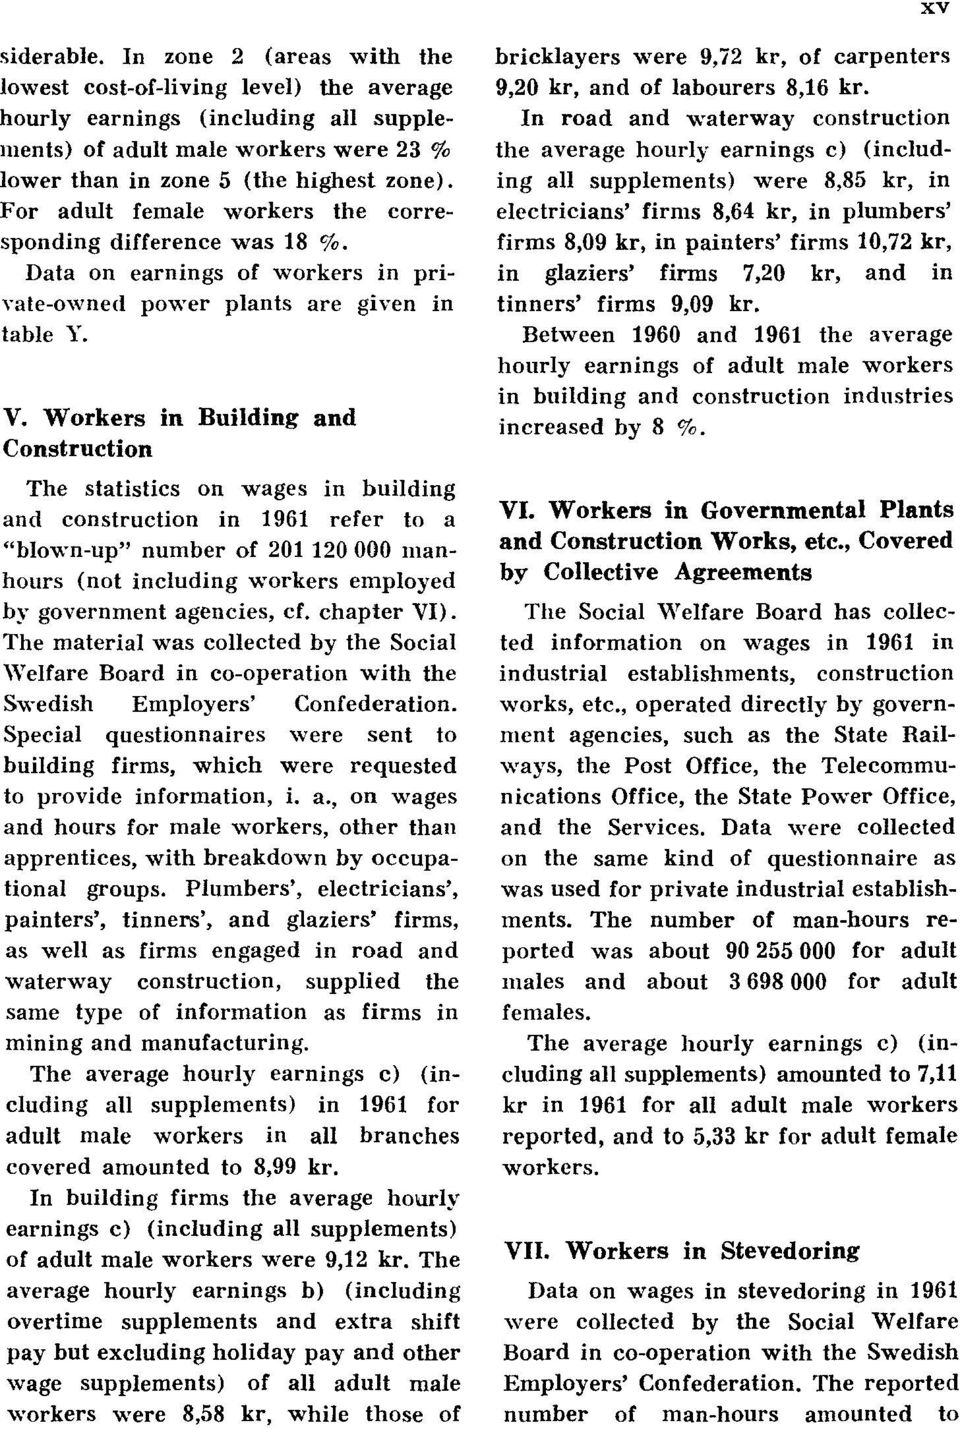 Workers in Building and Construction The statistics on wages in building and construction in 1961 refer to a "blown-up" number of 201 120 000 manhours (not including workers employed by government